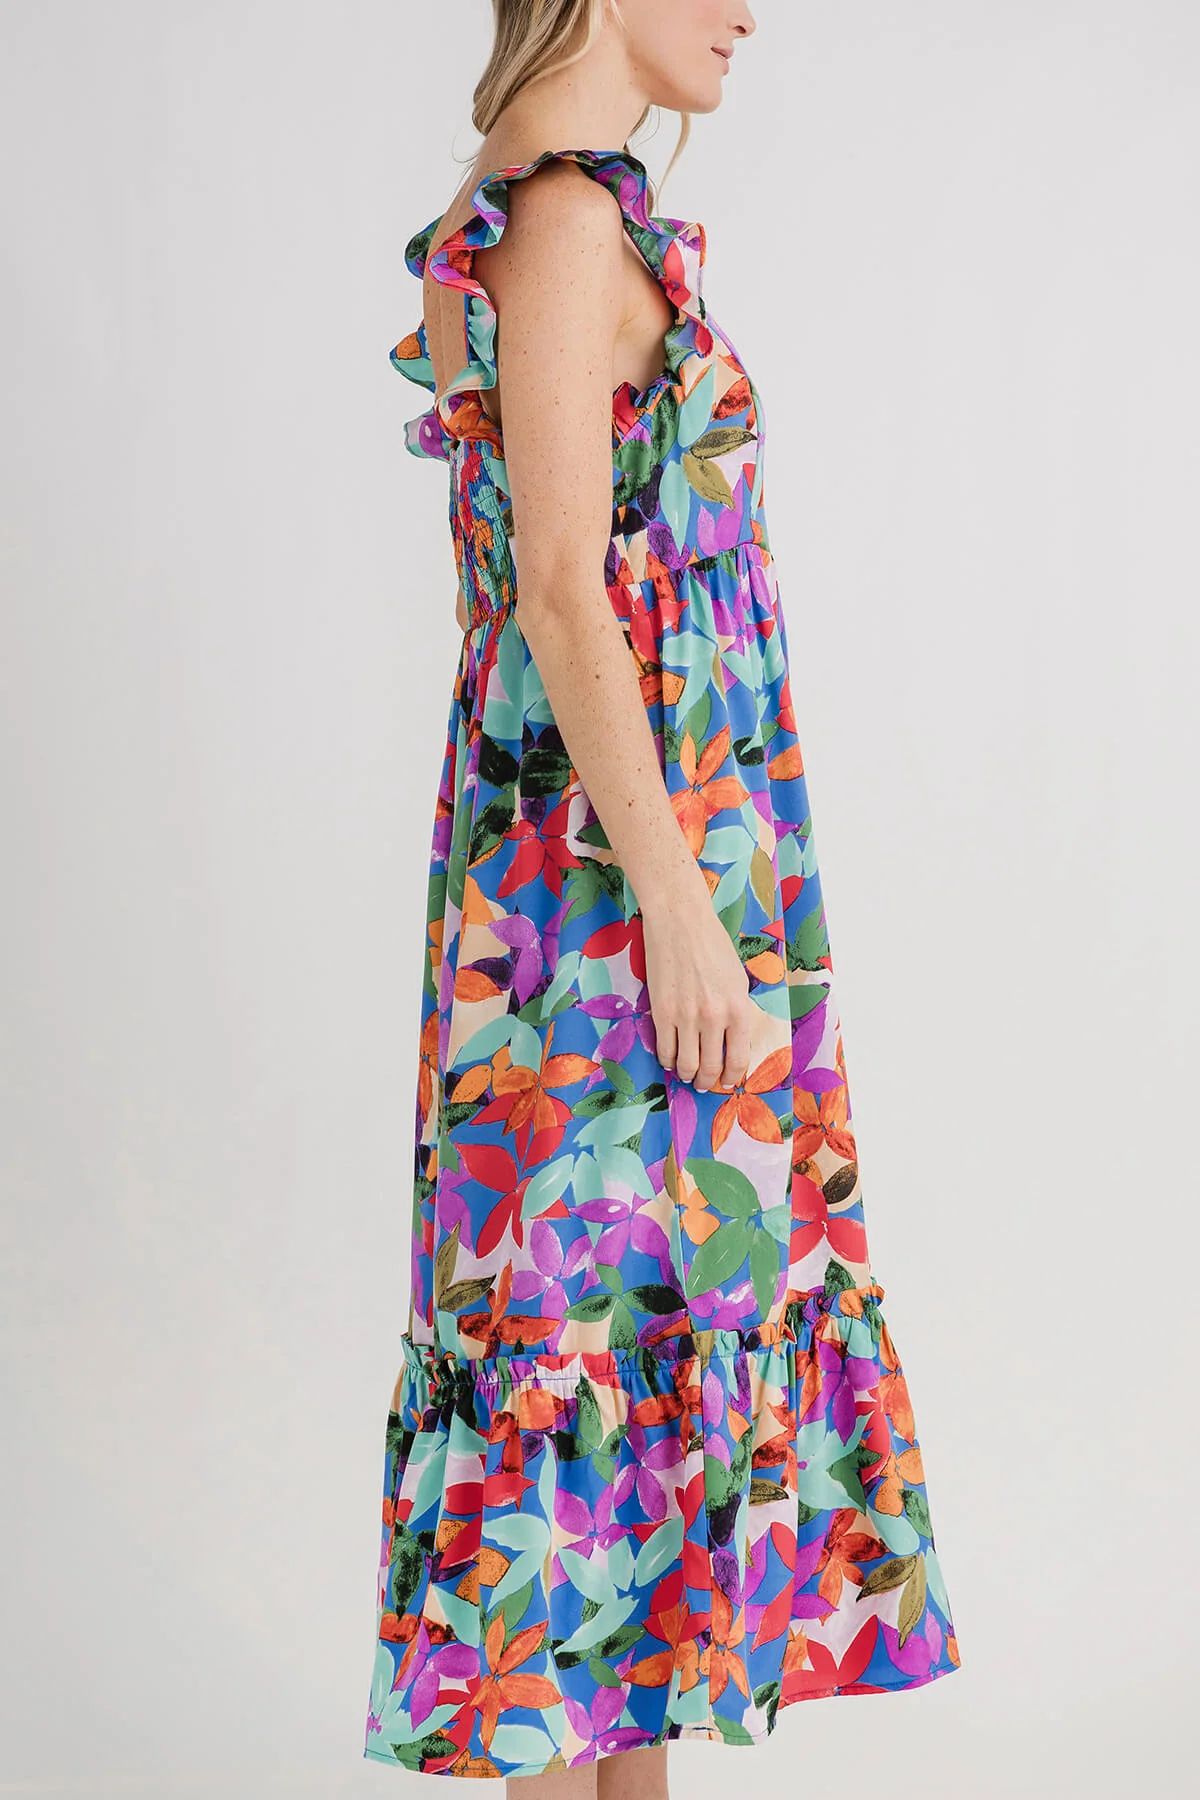 Eesome Floral Print Square Neck Dress | Social Threads